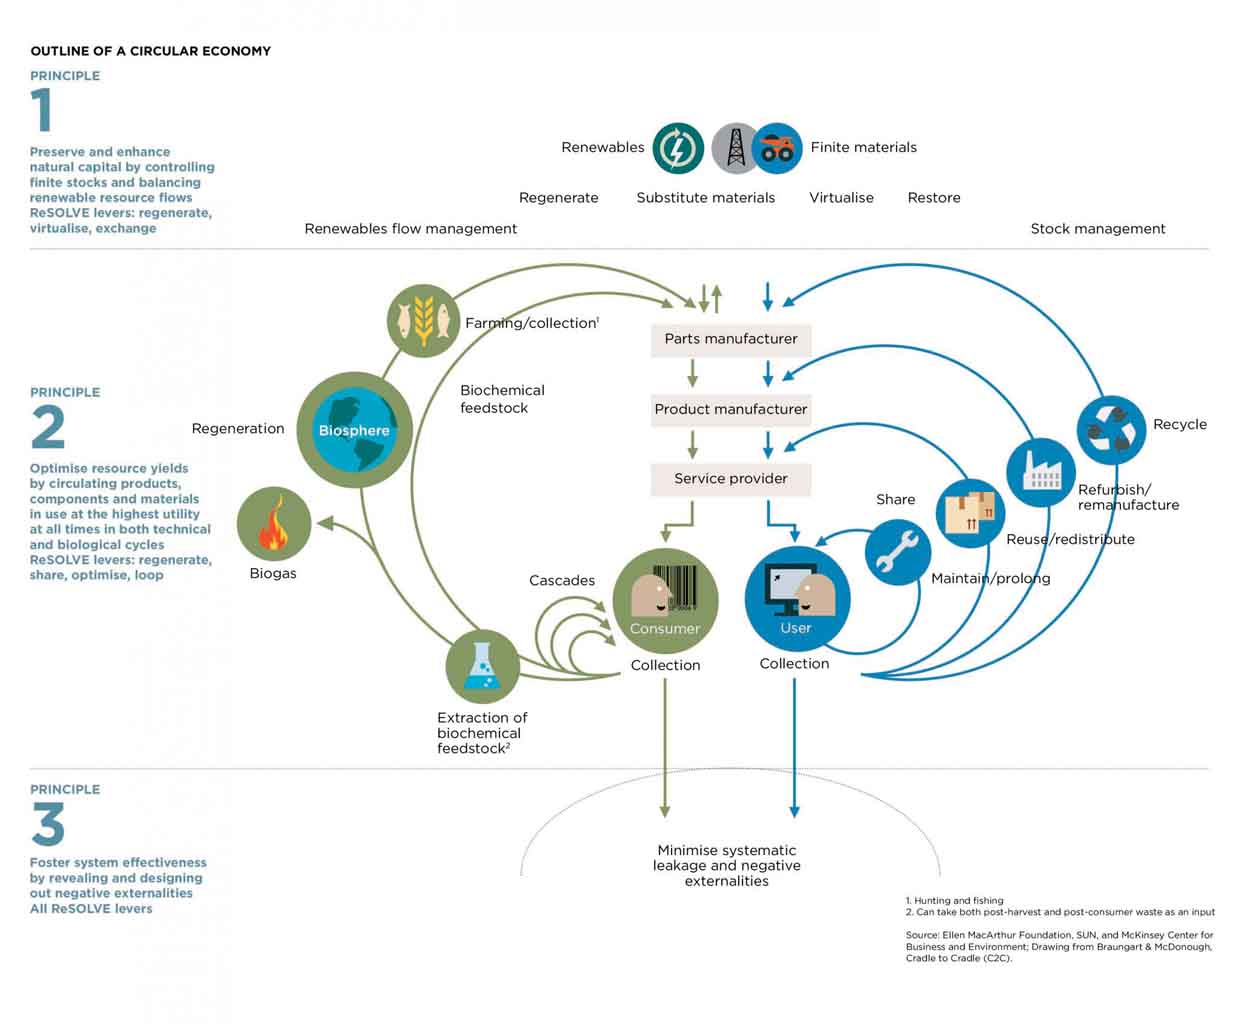 CIRCULAR-ECONOMY-Recycling-Value-Retention-Resilience-System-Diagram-Circular-Energy-Ellen-MacArthur-Foundation-material-streams-organic-biosphere-technical-product-components-designed-reused